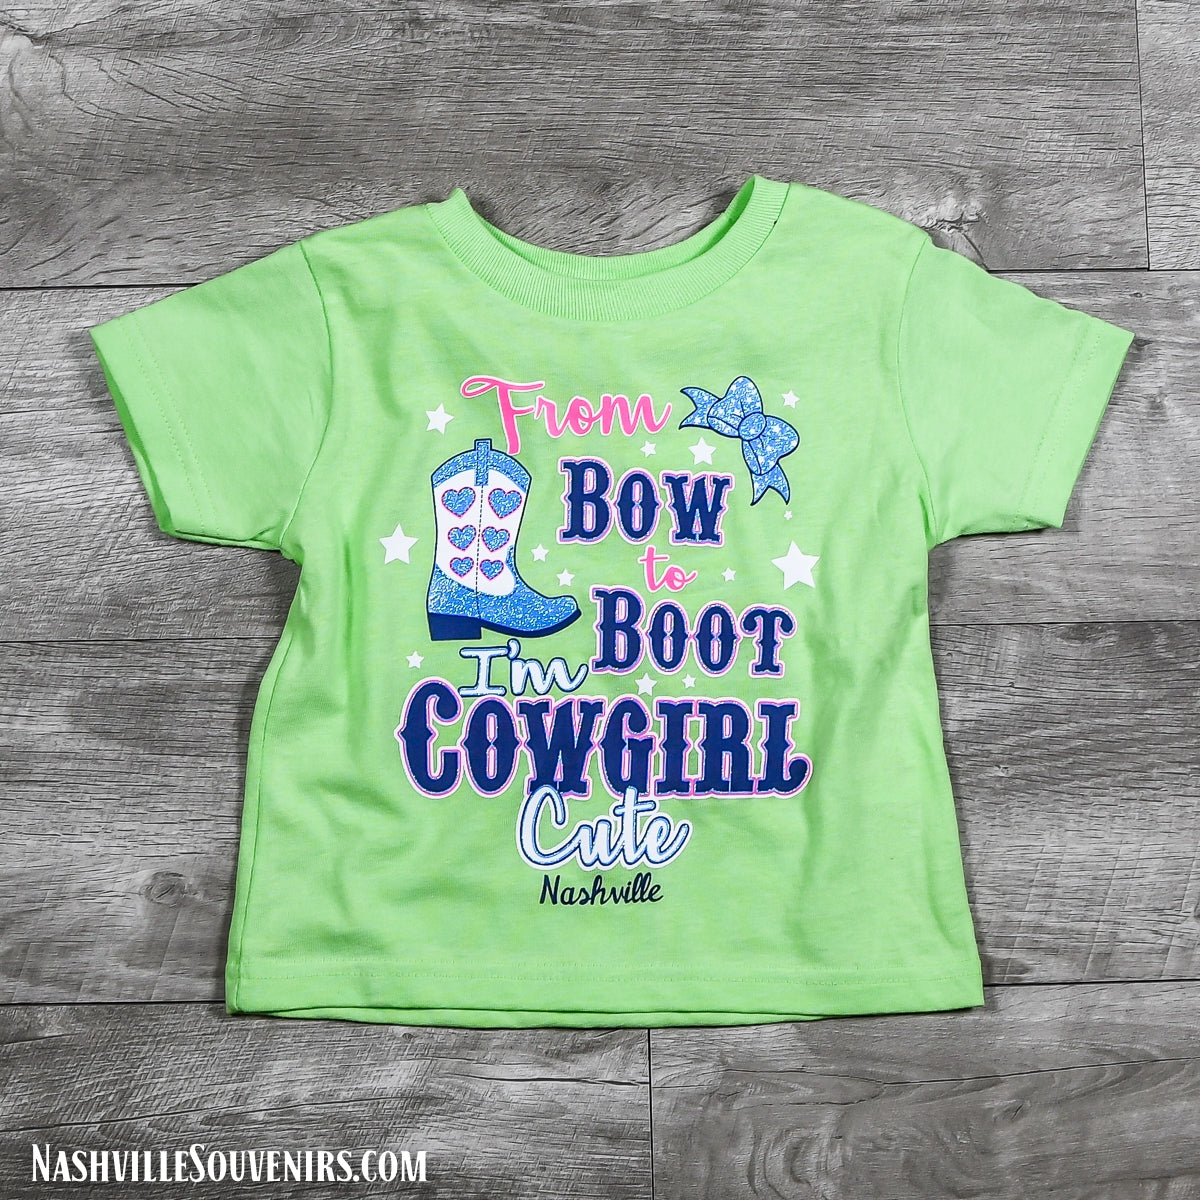 Bow to Boot Cowgirl Nashville Toddlers T-Shirt